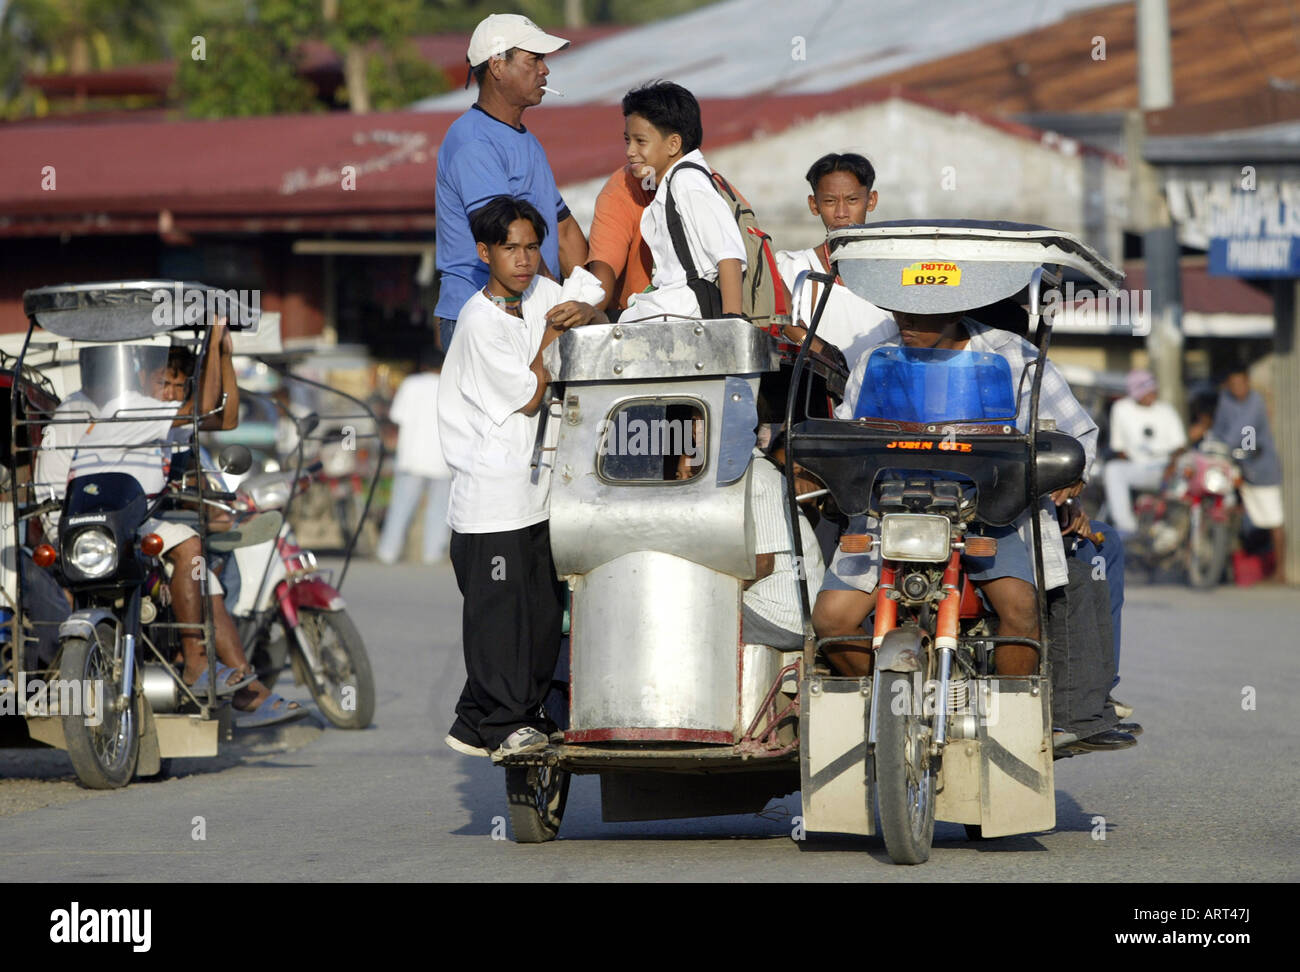 Filipinos ride a tricycle taxi through the streets of Mansalay, Oriental Mindoro, Philippines. Stock Photo